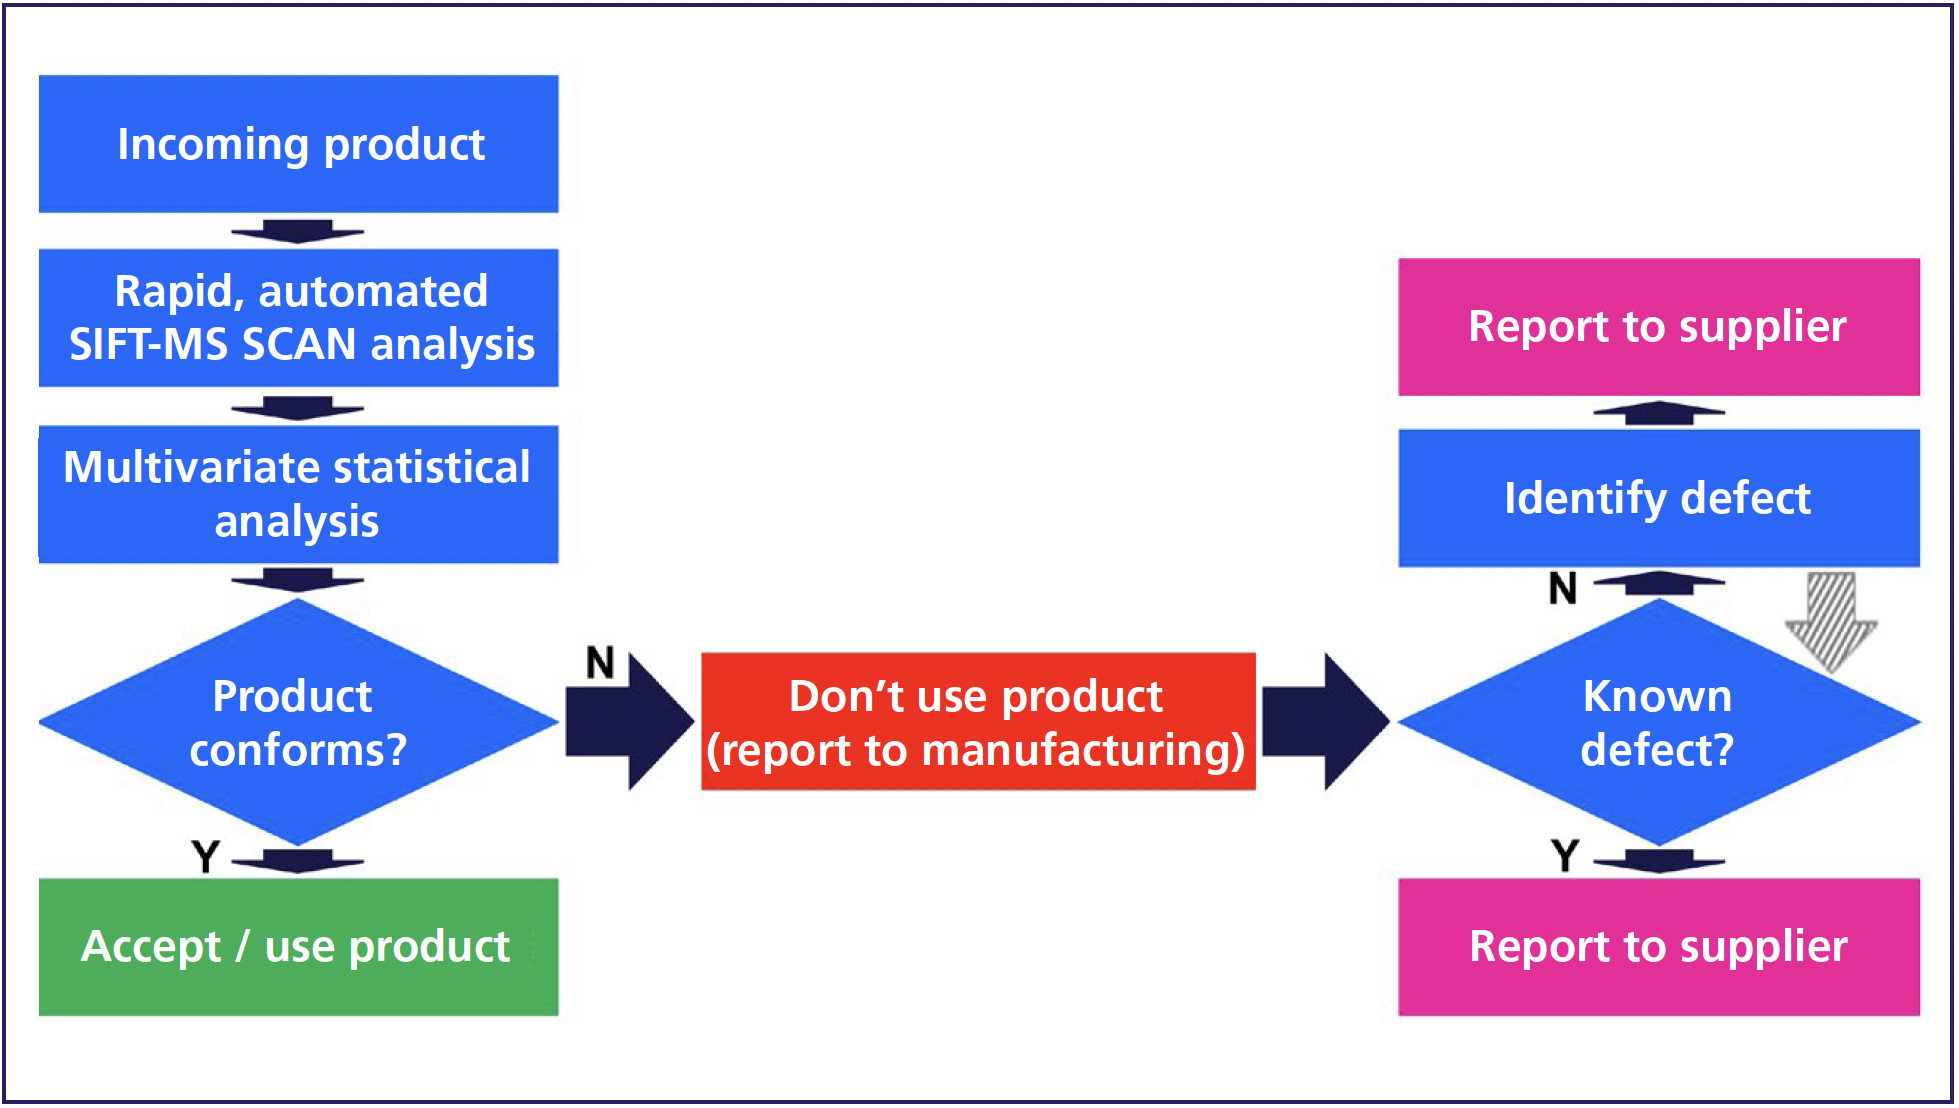 FIGURE 4: An approach to practically implementing automated, untargeted SIFT-MS analysis in a food quality control application (using ingredient screening as an example).